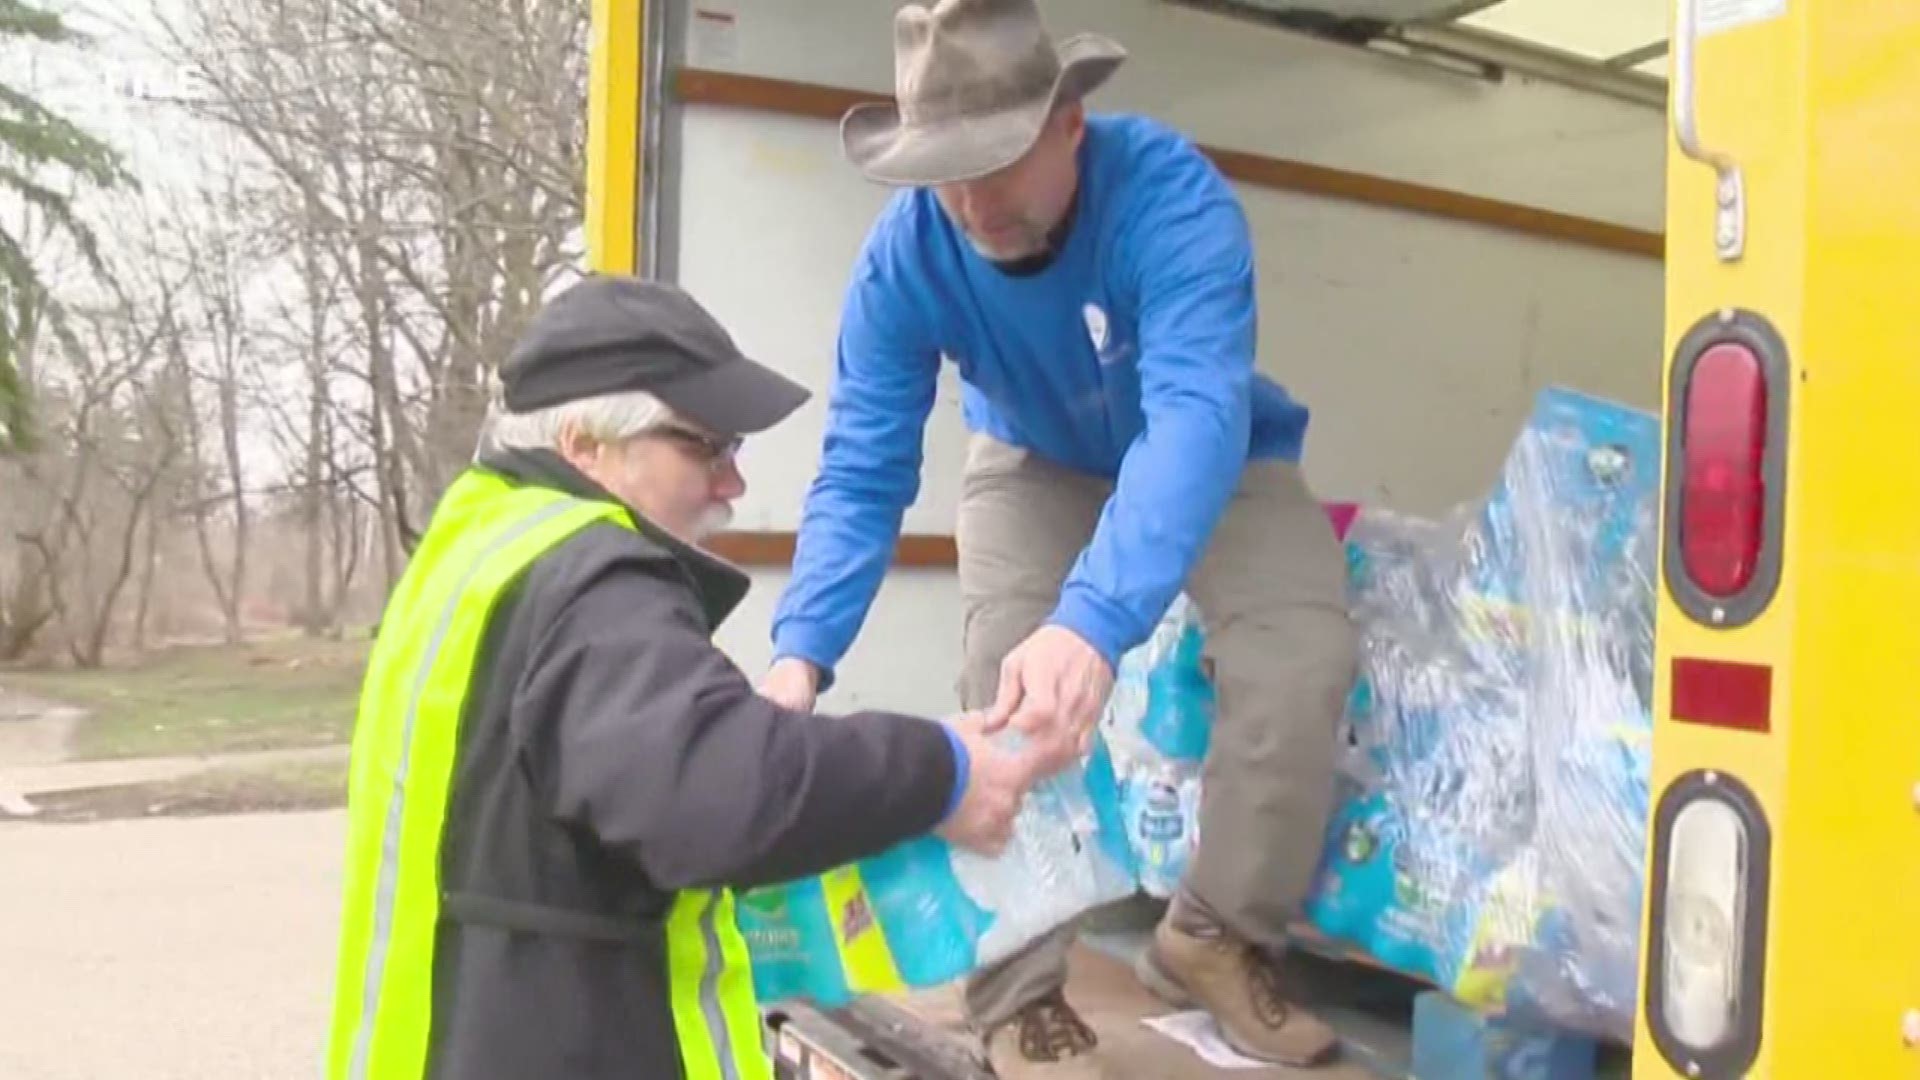 West Michigan resumes collecting water for Flint